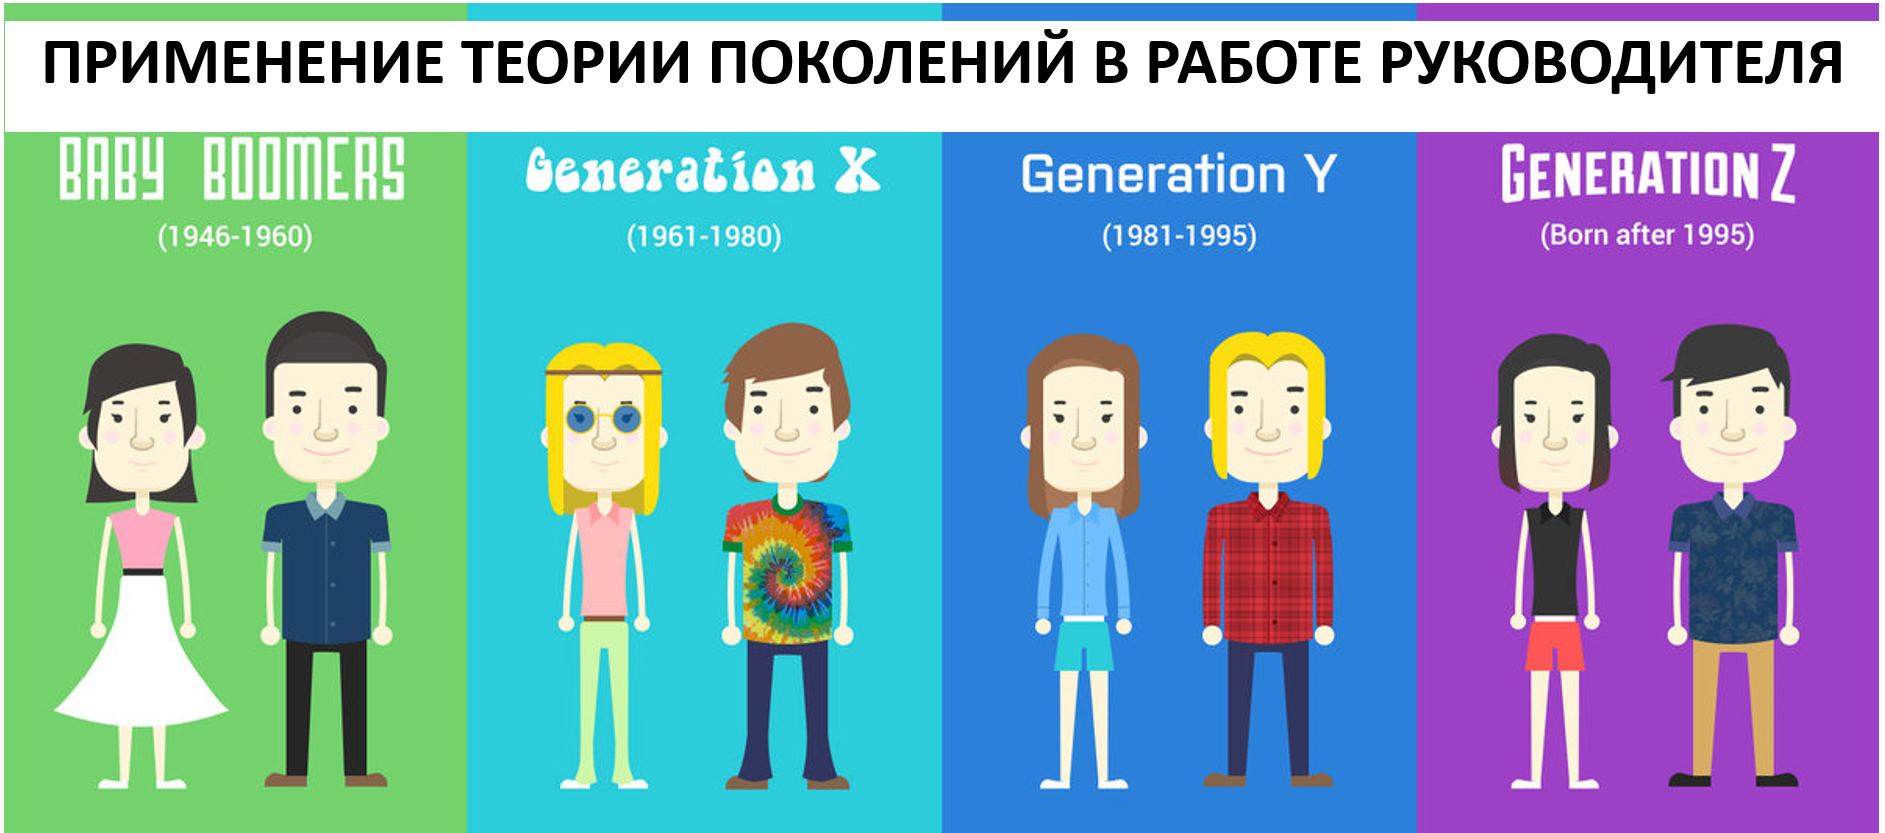 Generation means